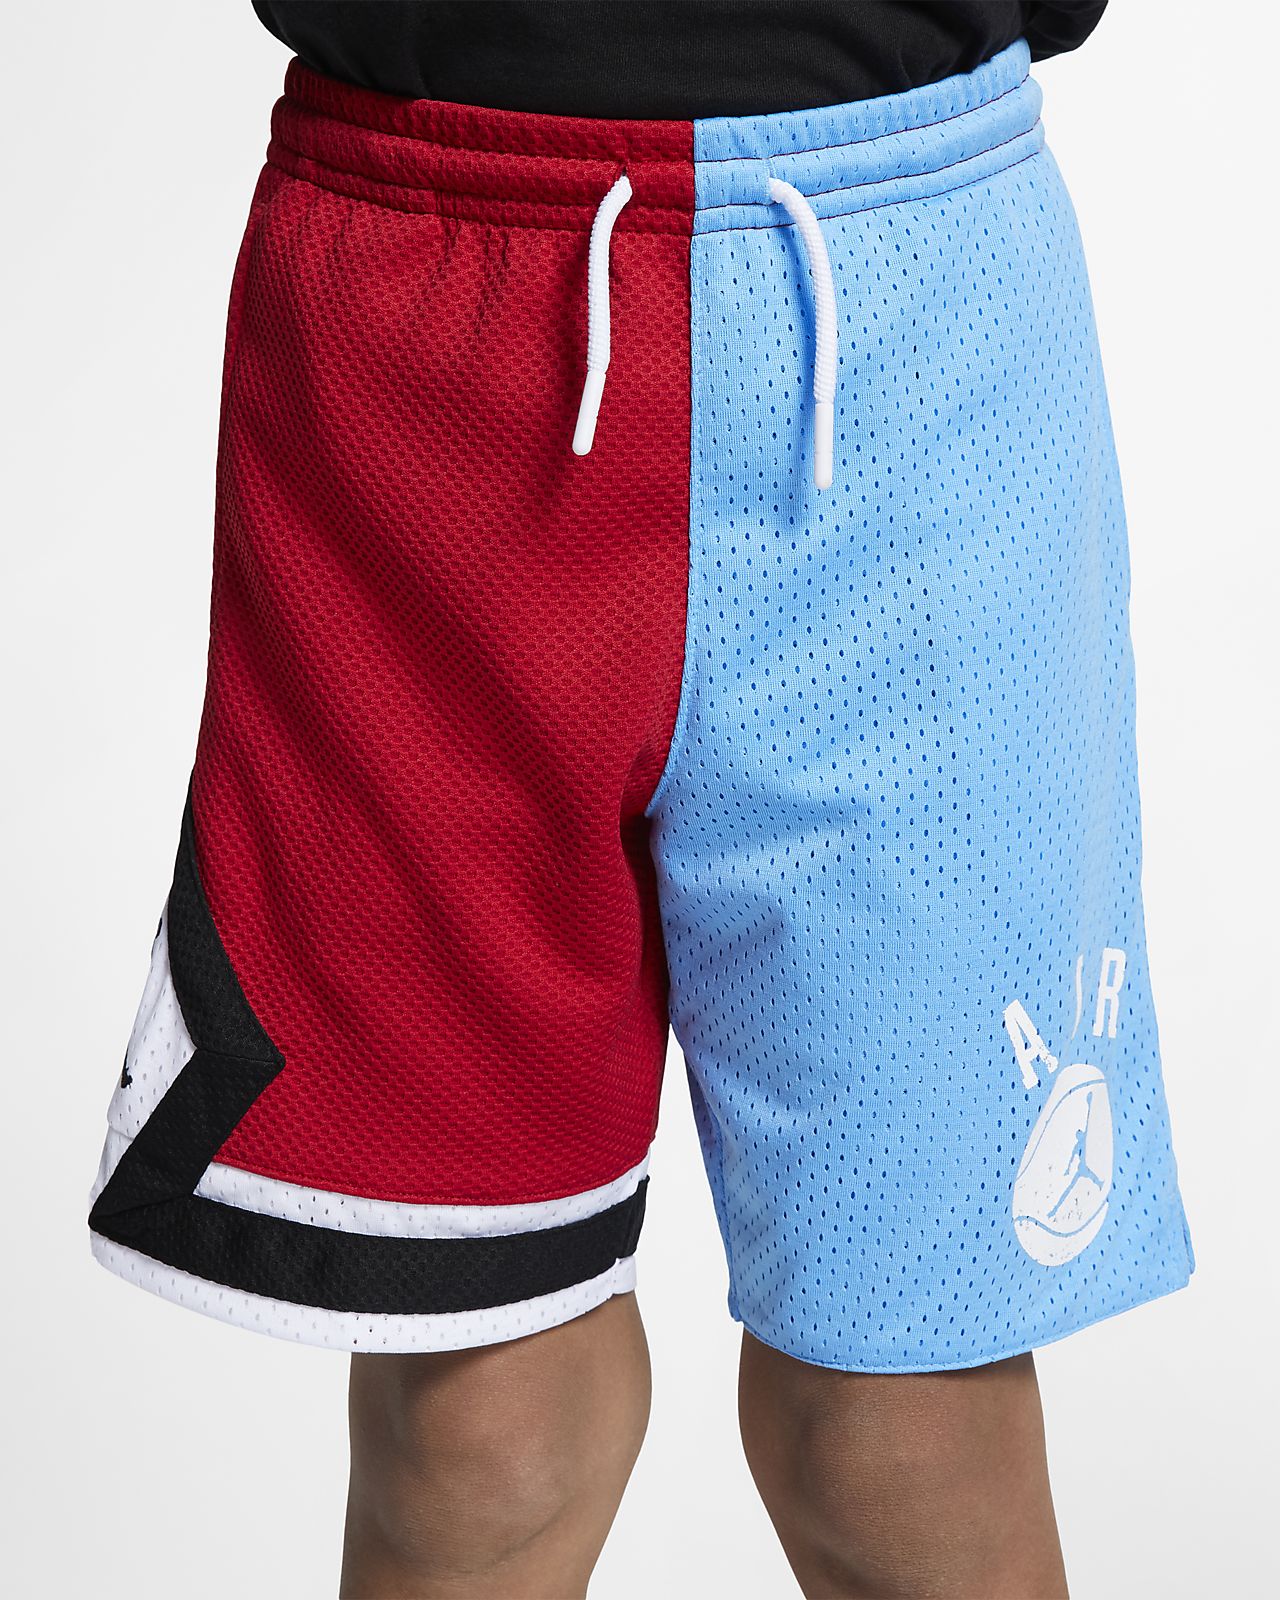 jordan blue and red shorts online